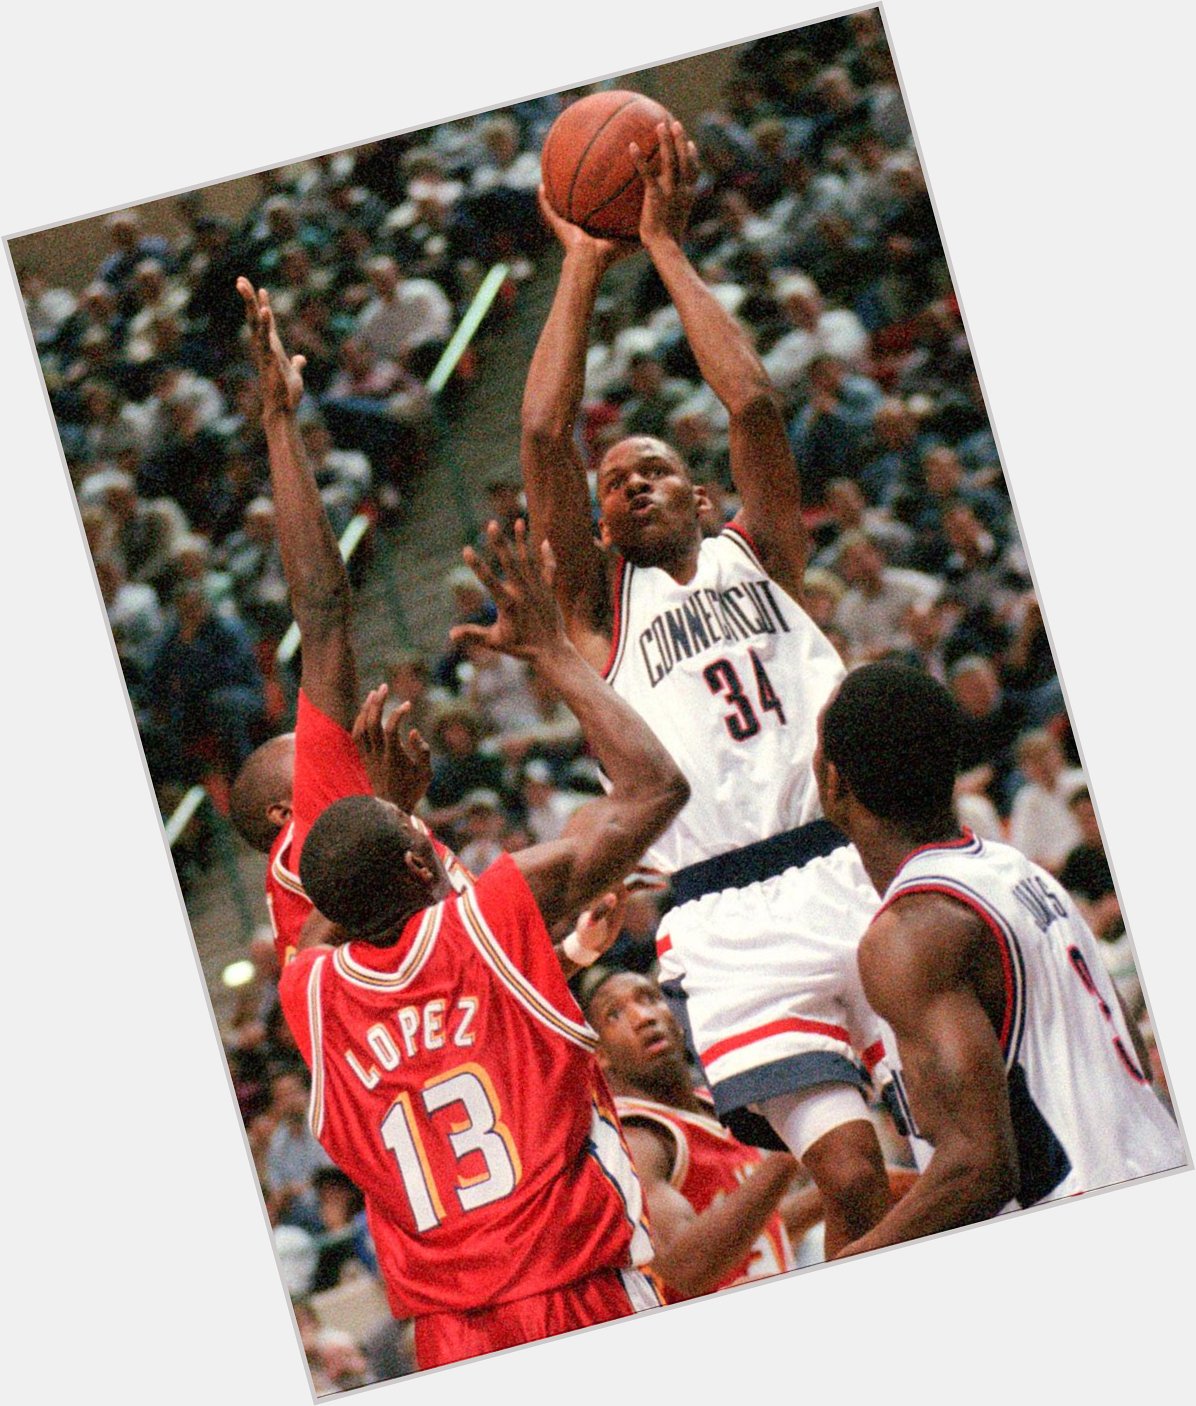 Happy Birthday Ray Allen. He was born on July 20, 1975

Sports history July:  